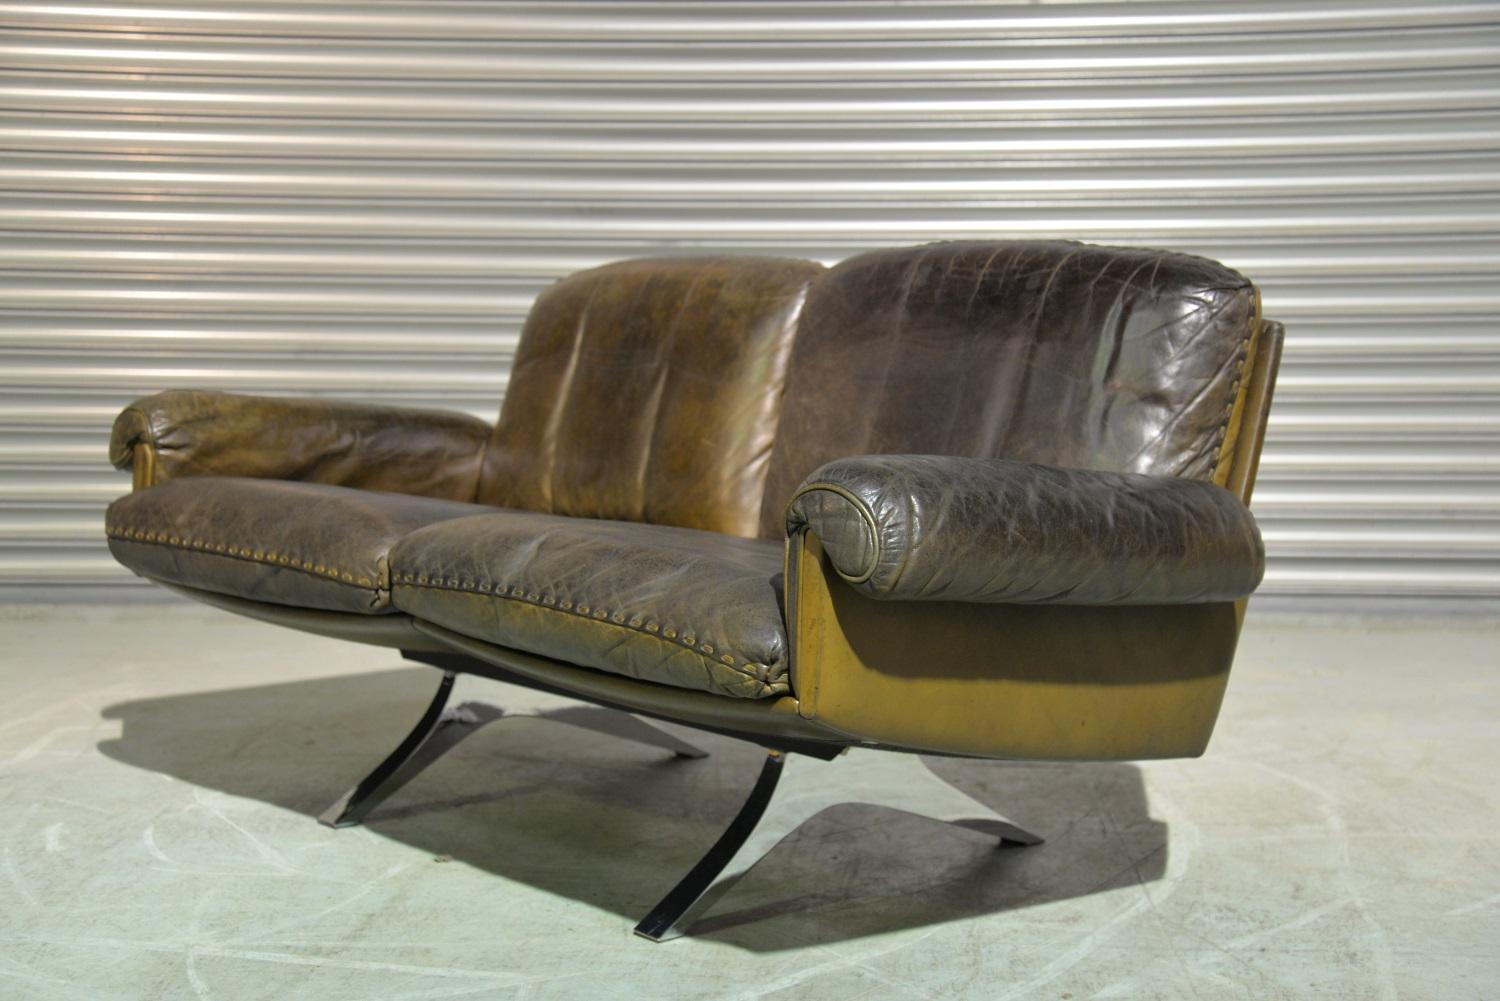 Discounted airfreight for our US and International customers (from 2 weeks door to door)

We are delighted to bring to you a vintage 1970`s de Sede DS 31 two-seat sofa or loveseat in olive/brown aniline leather with superb whipstitch edge detail.